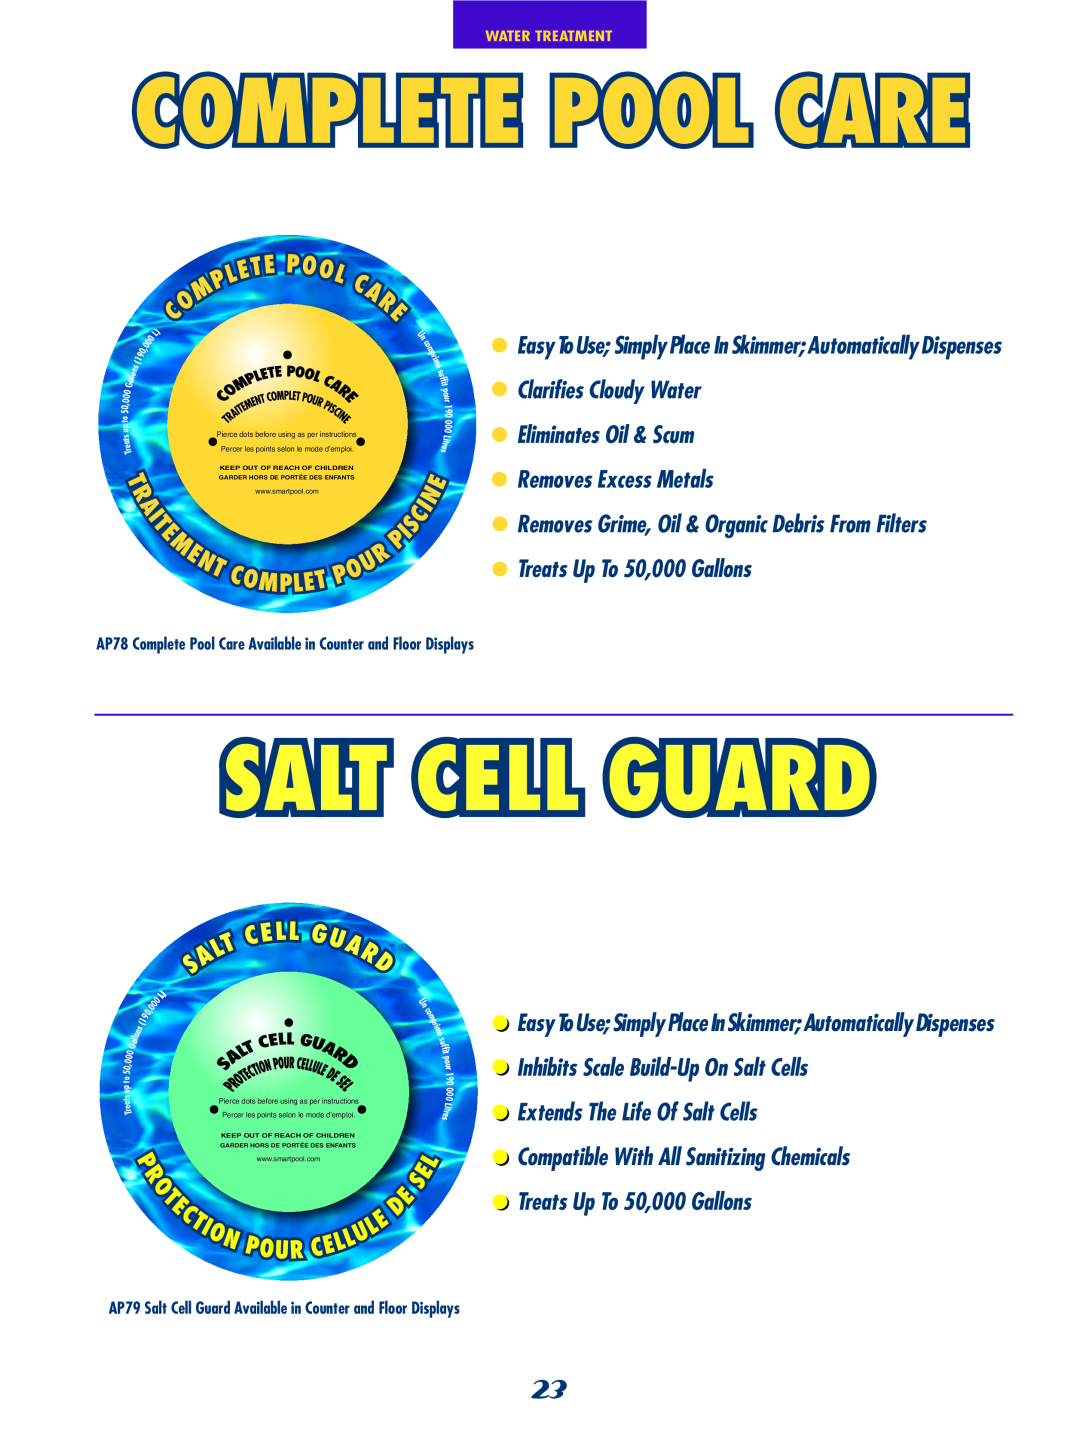 SmartPool Inc NC31 Clarifies Cloudy Water Eliminates Oil & Scum, •Removes Excess Metals, •Treats Up To 50,000 Gallons 